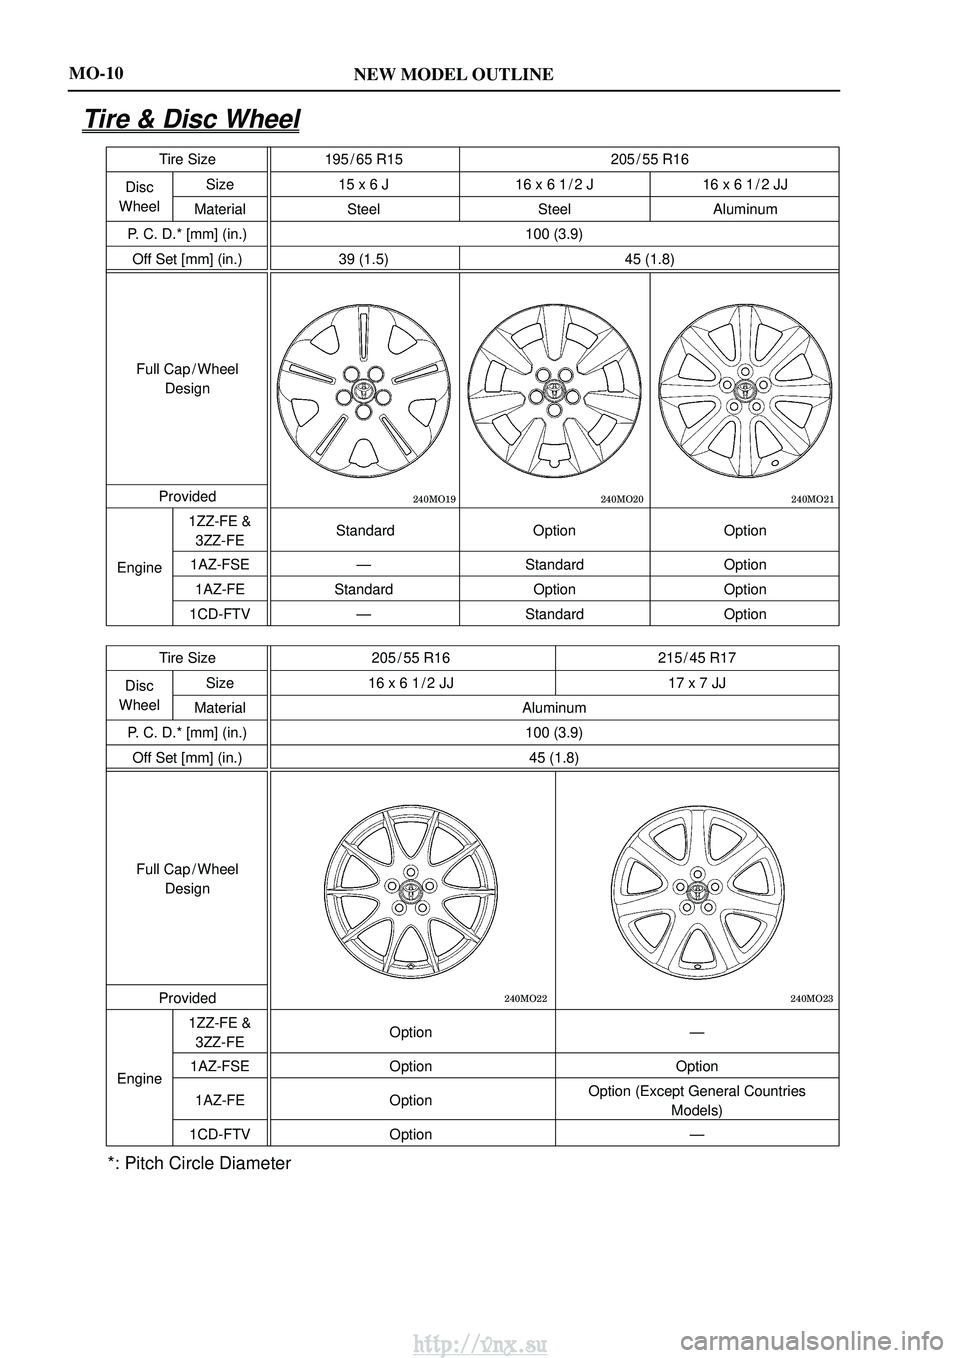 TOYOTA AVENSIS 2003  Service Repair Manual NEW MODEL OUTLINEMO-10
Tire & Disc Wheel
Tire Size195 / 65 R15 205 / 55 R16
Disc Size
15 x 6 J 16 x 6 1 / 2 J 16 x 6 1 / 2 JJ
Wheel Material Steel SteelAluminum
P. C. D.* [mm] (in.) 100 (3.9)
Off Set 